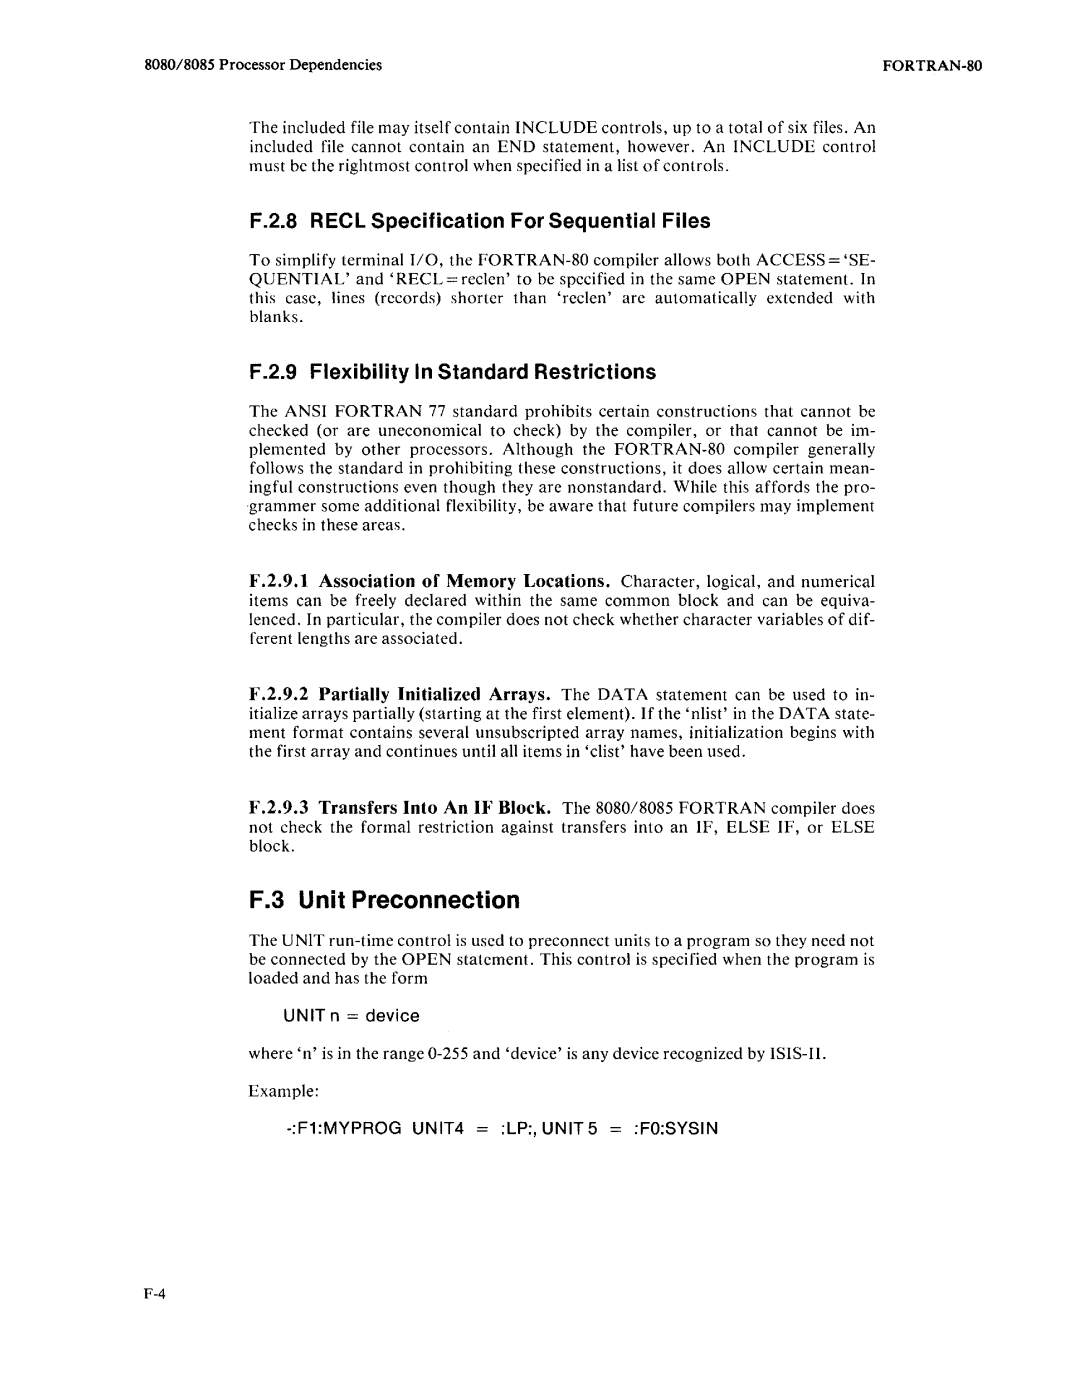 Intel fortran-80 manual F.2.8 REel Specification For Sequential Files, F.2.9 Flexibility In Standard Restrictions 